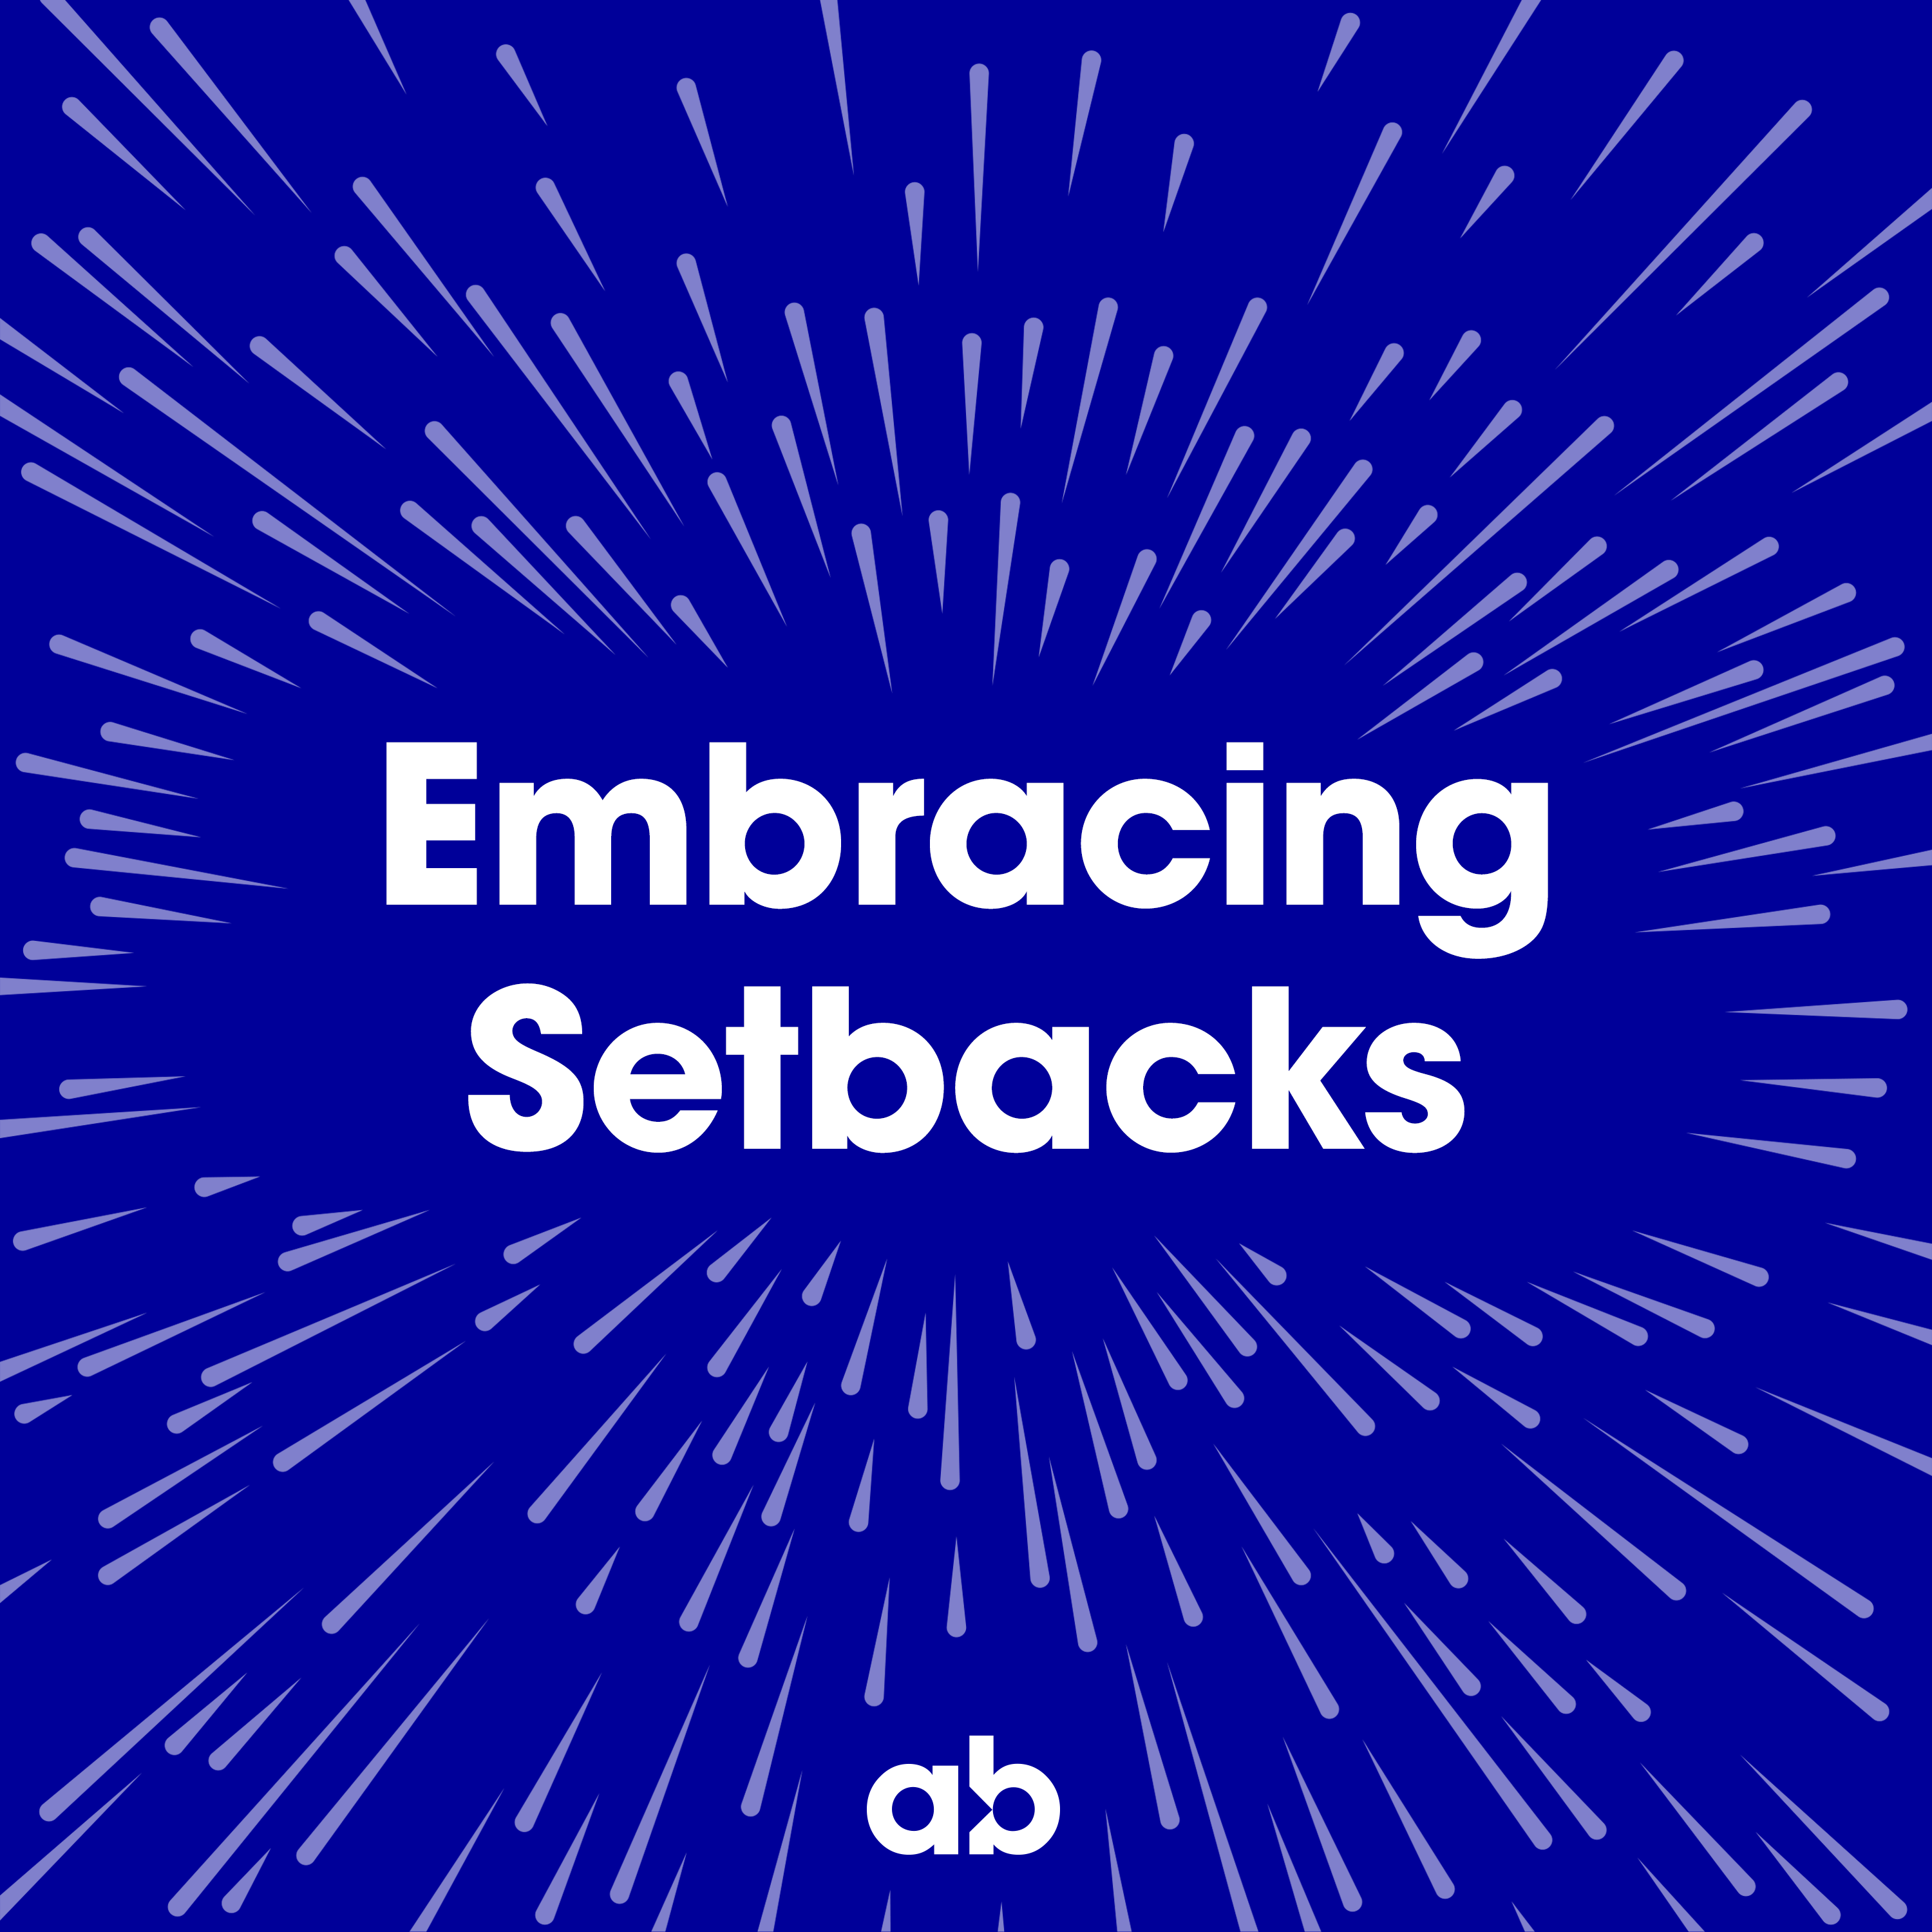 Ep 8. From "managing problems" to "embracing setbacks" - with Sylke Poeling